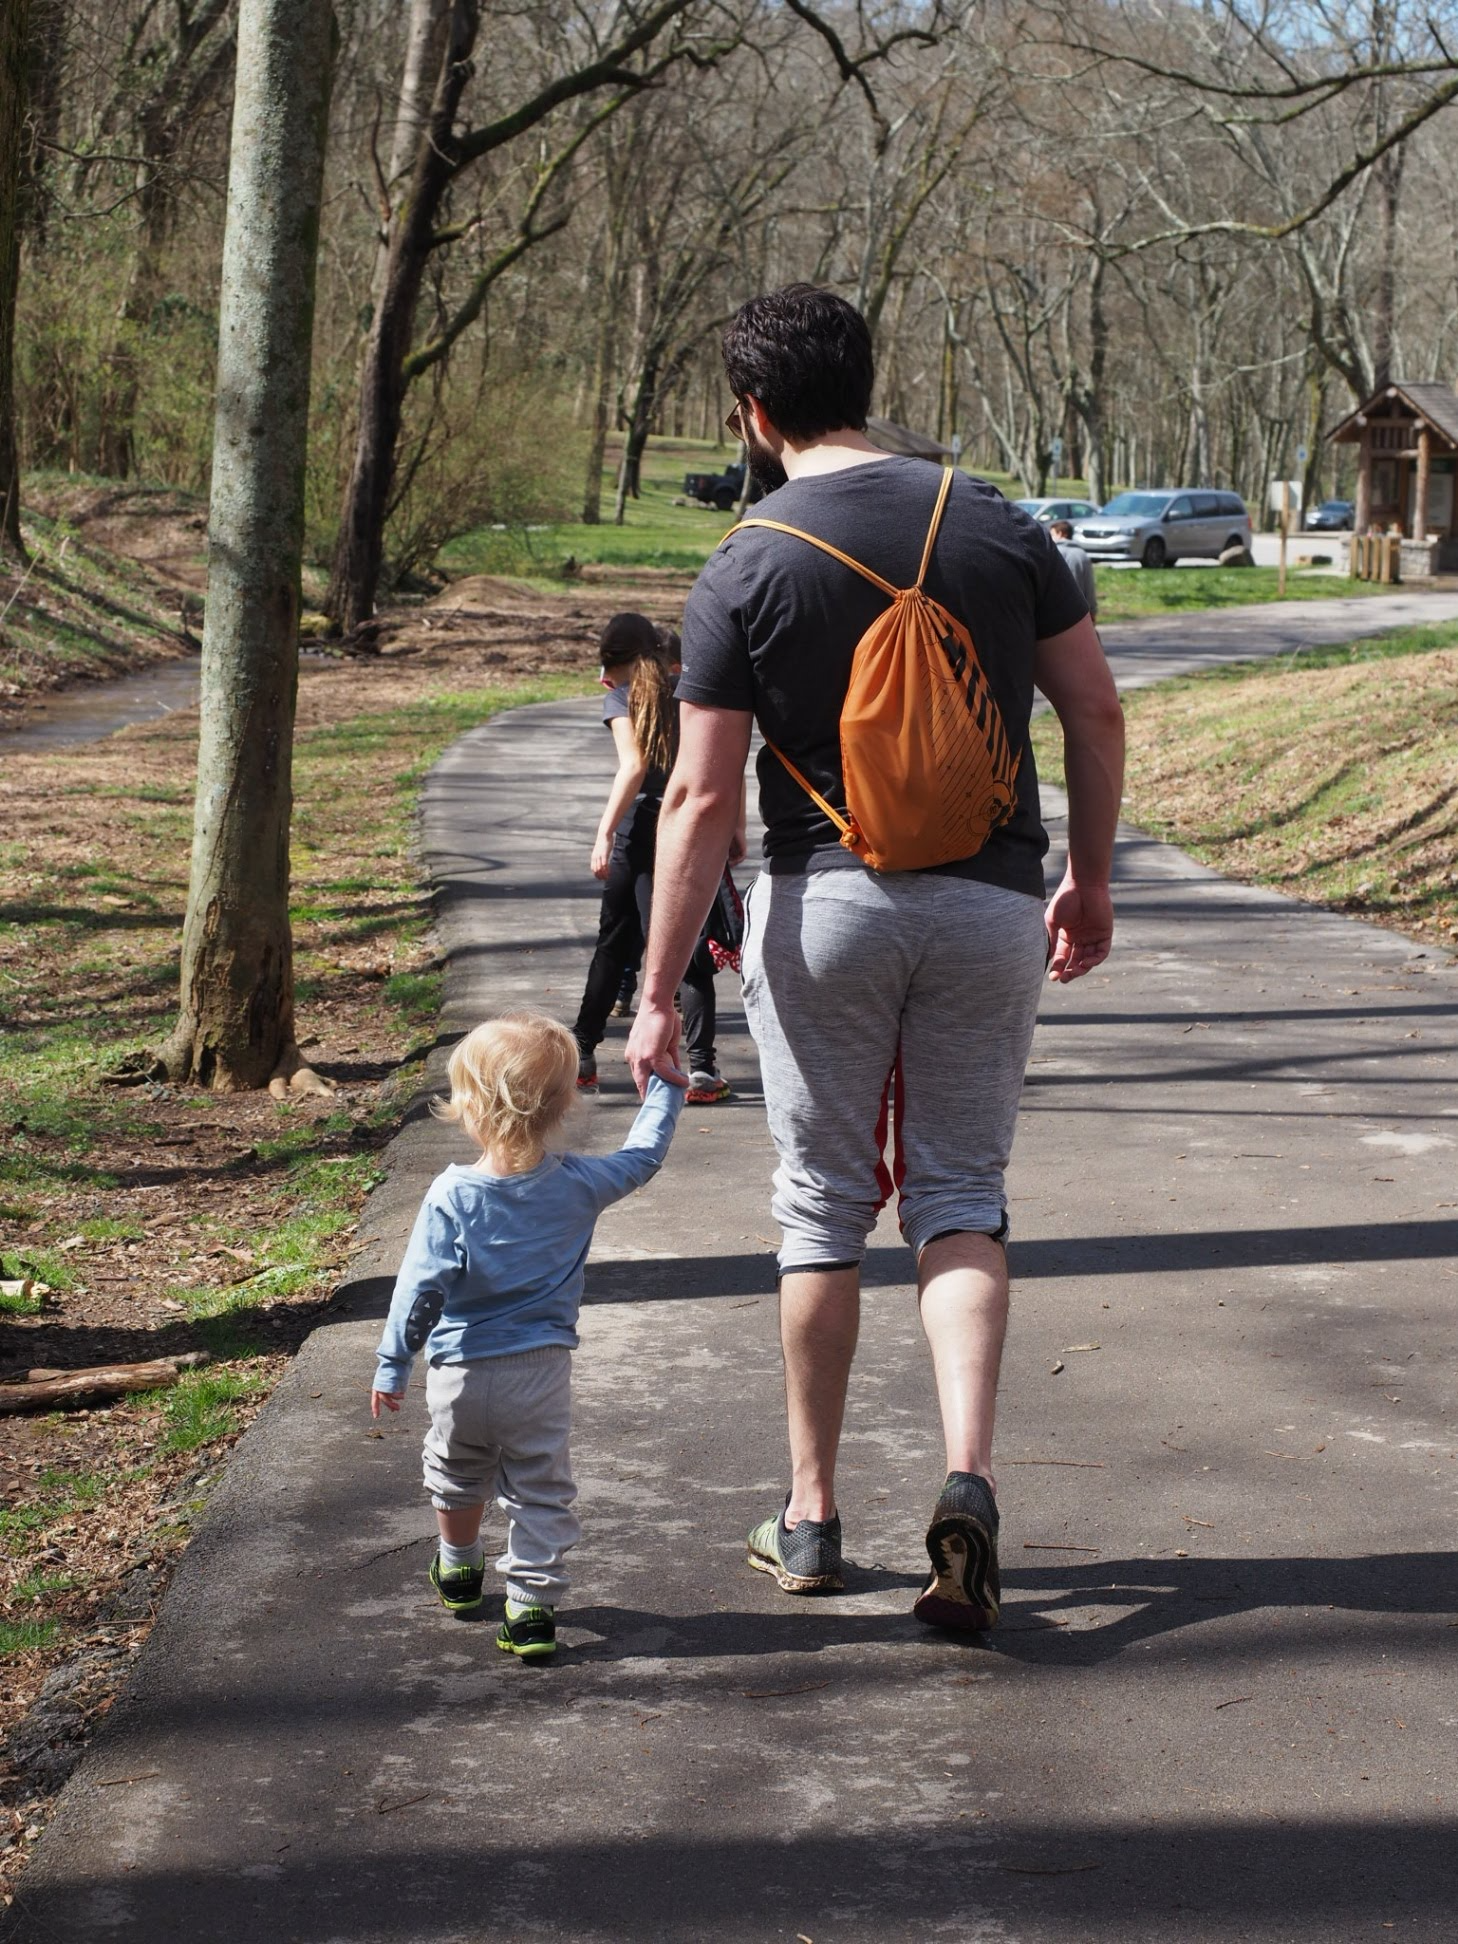 The author holding his godson's hand and walking along a trail in Nashville, possibly Percy Warner Park's Deep Well trailhead